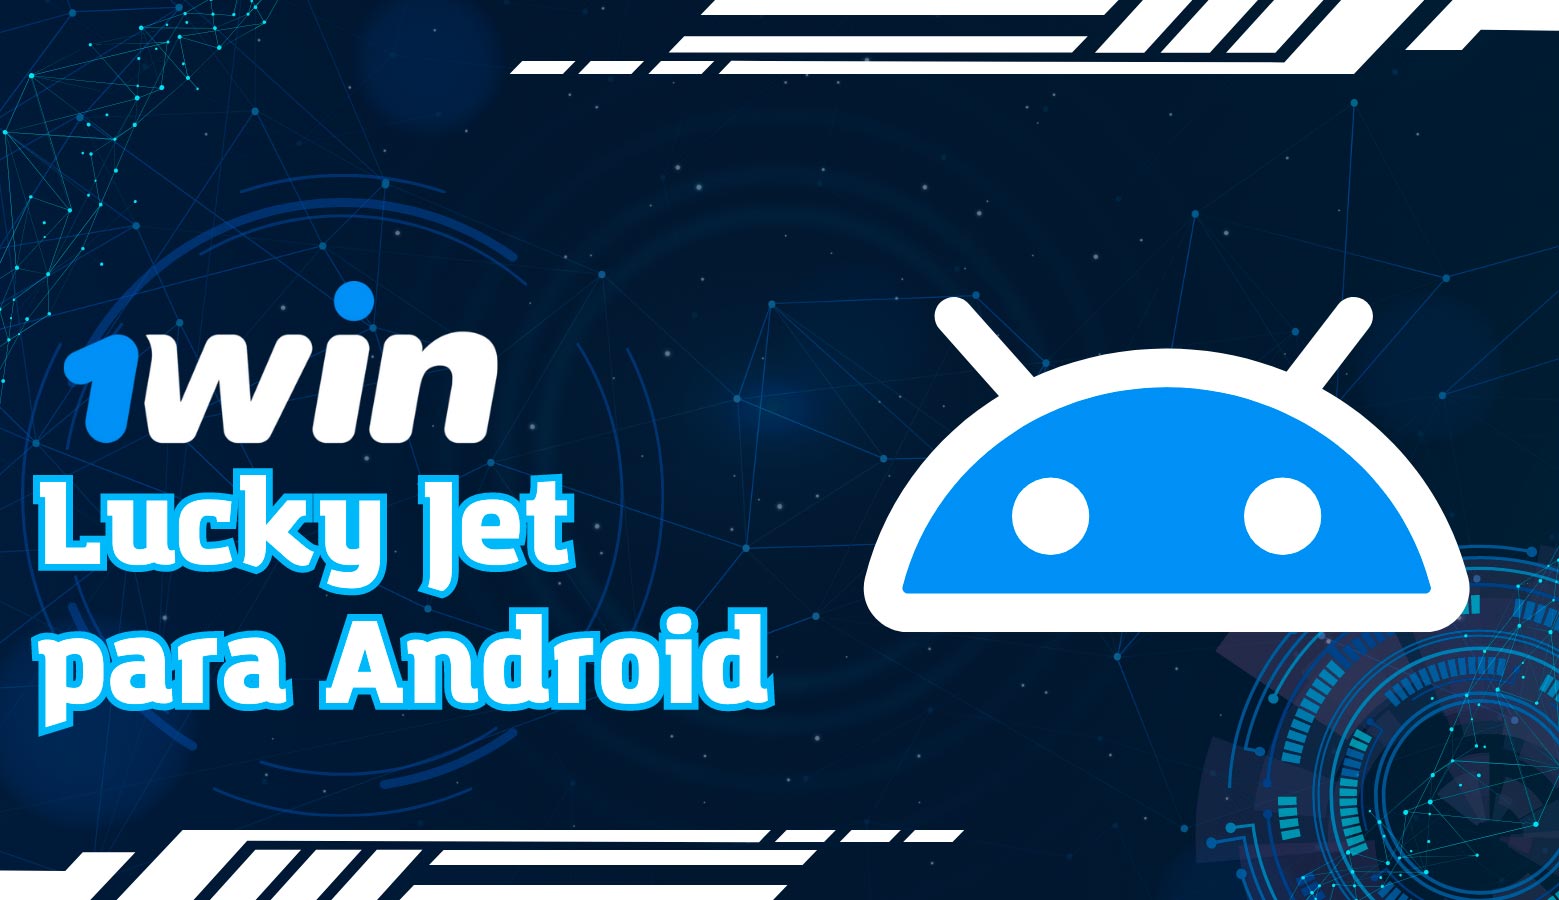 1Win Lucky Jet para Android